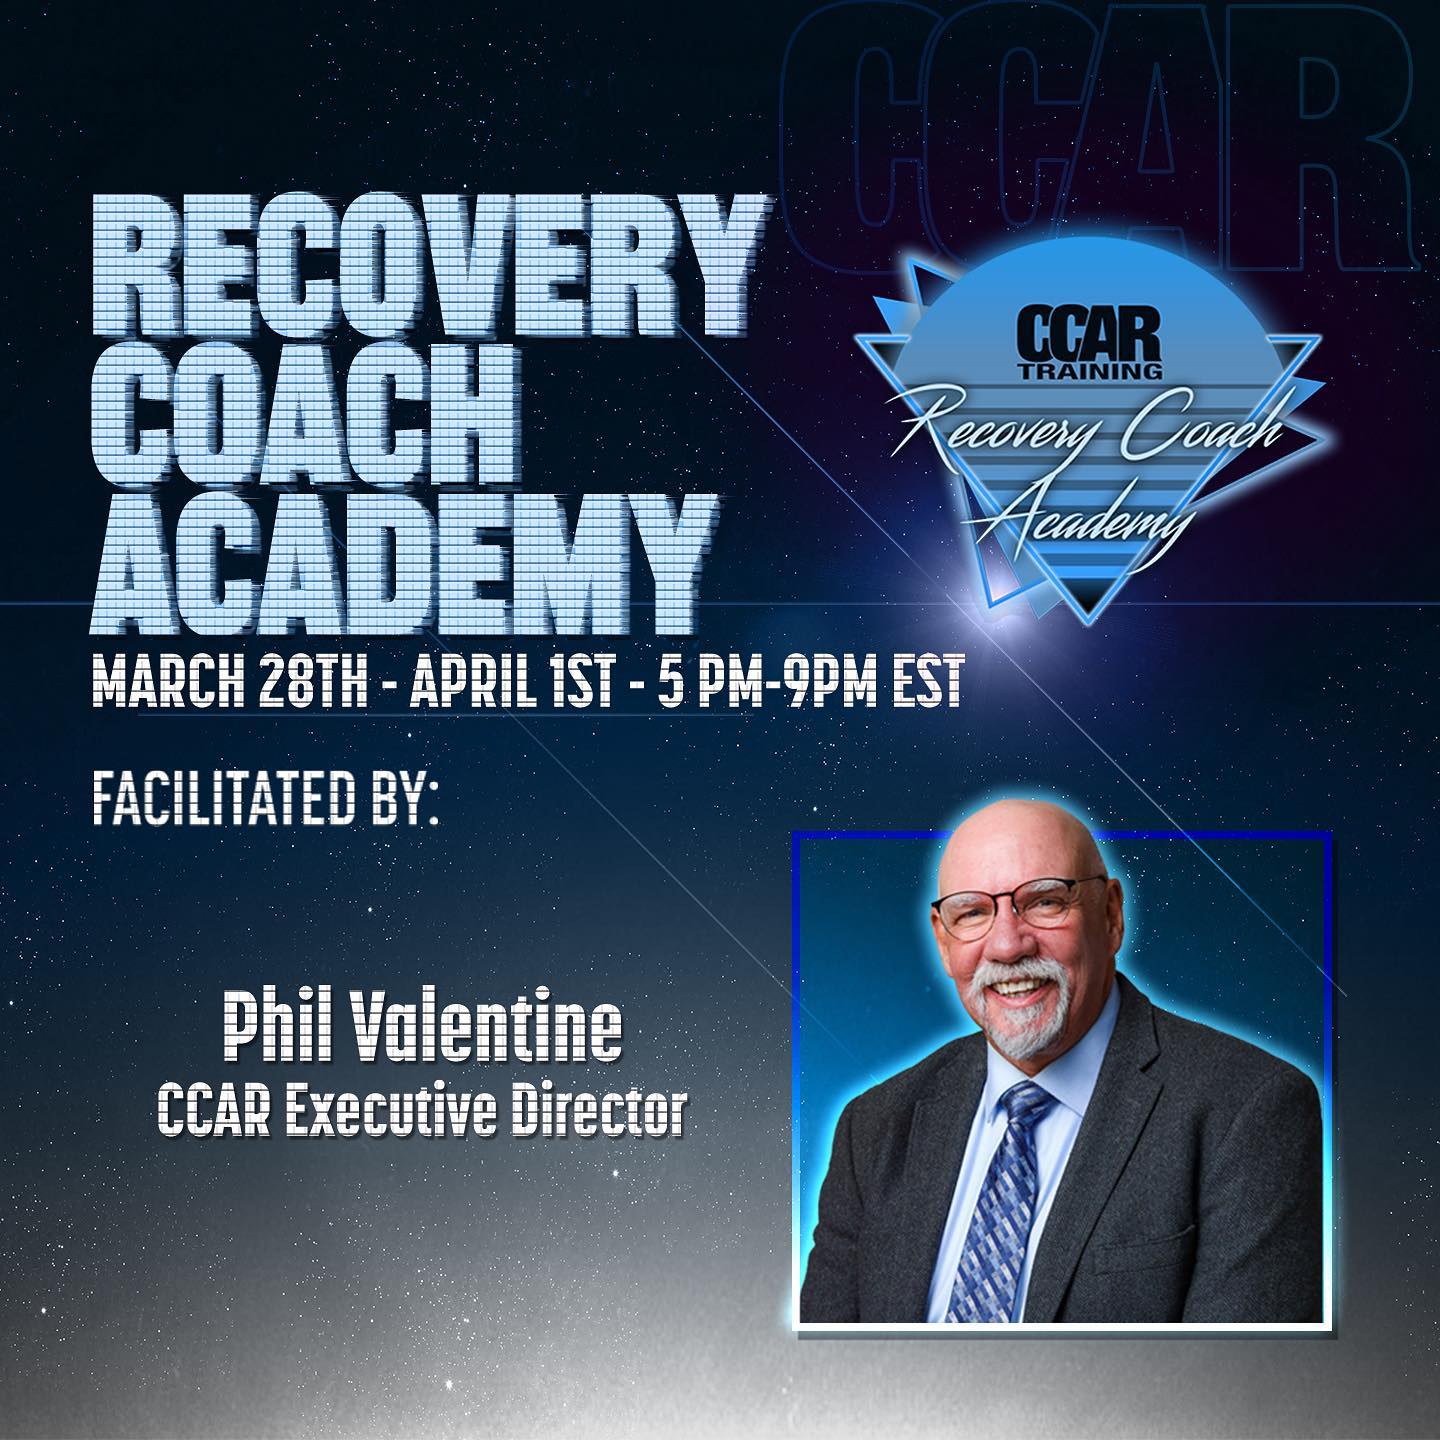 Our Executive Director, Phil Valentine will be facilitating our PM offering of RCA in March! Will you join us?

REGISTER TODAY: https://addictionrecoverytraining.org/cart-events/. 

#recovery #recoverycoach #recoverycoaching #recoveryispossible #recoverycoachingworks #recoverymatters #virtuallearning #onlinetraining #trainer #peersupport #wecanrecover #recoveryjourney #facilitators #march #upcomingopportunities